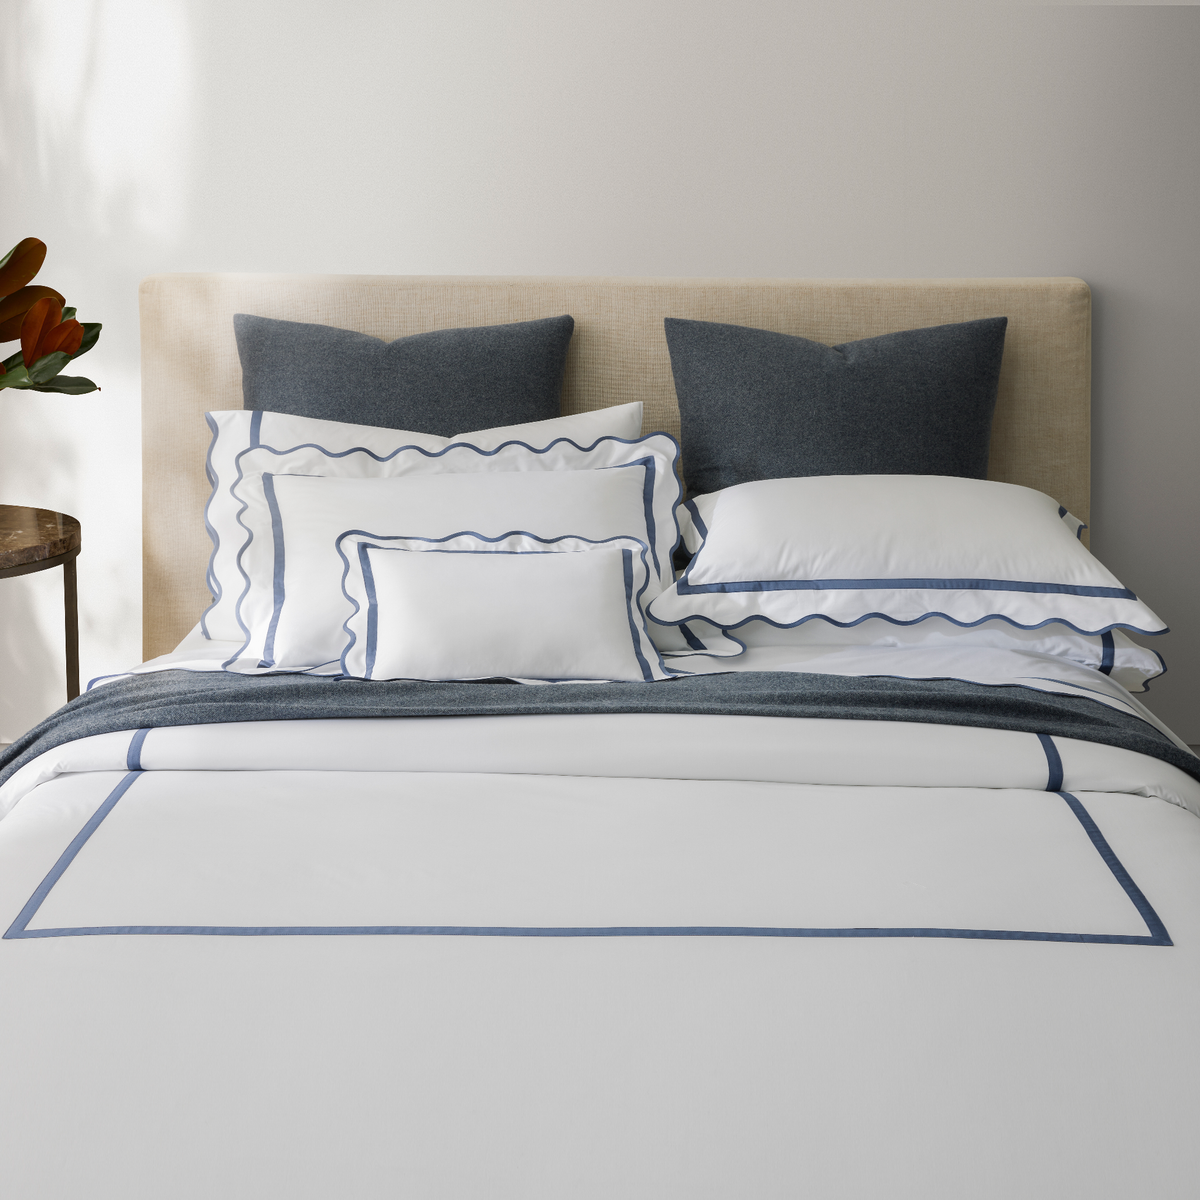 Front View of Full Bed in Matouk Cornelia Bedding in Steel Blue Color